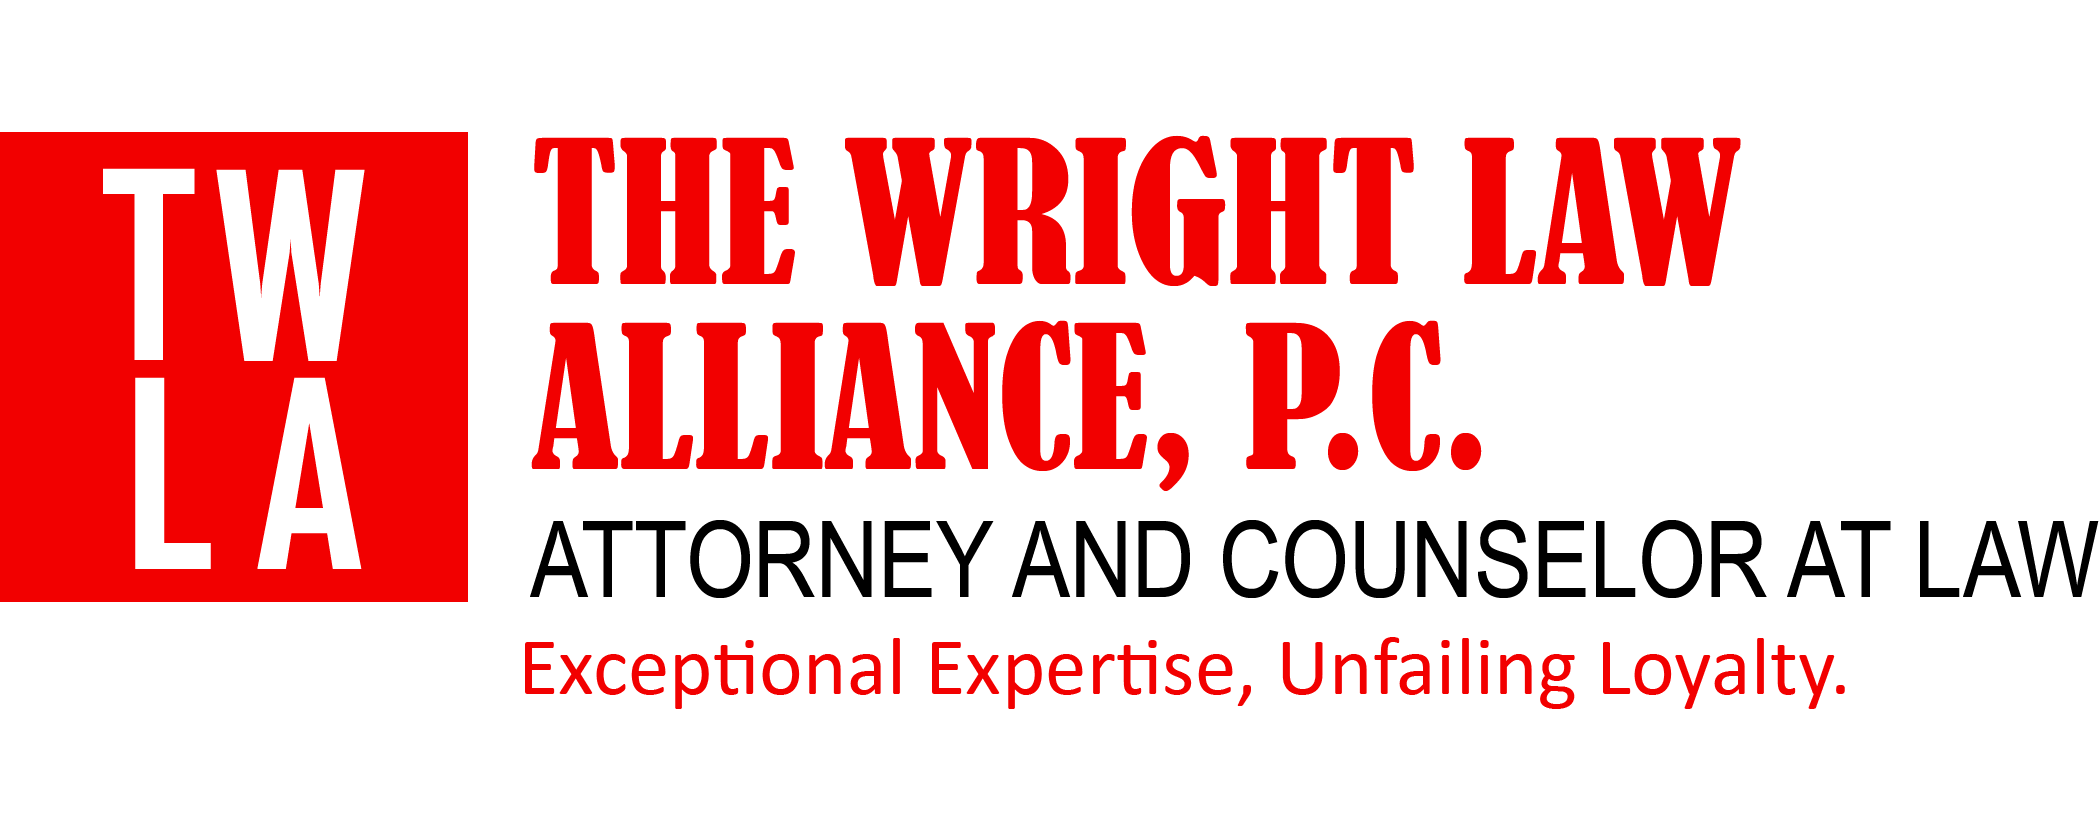 Theight Law Alliance PC Attorney & Counselor at Law